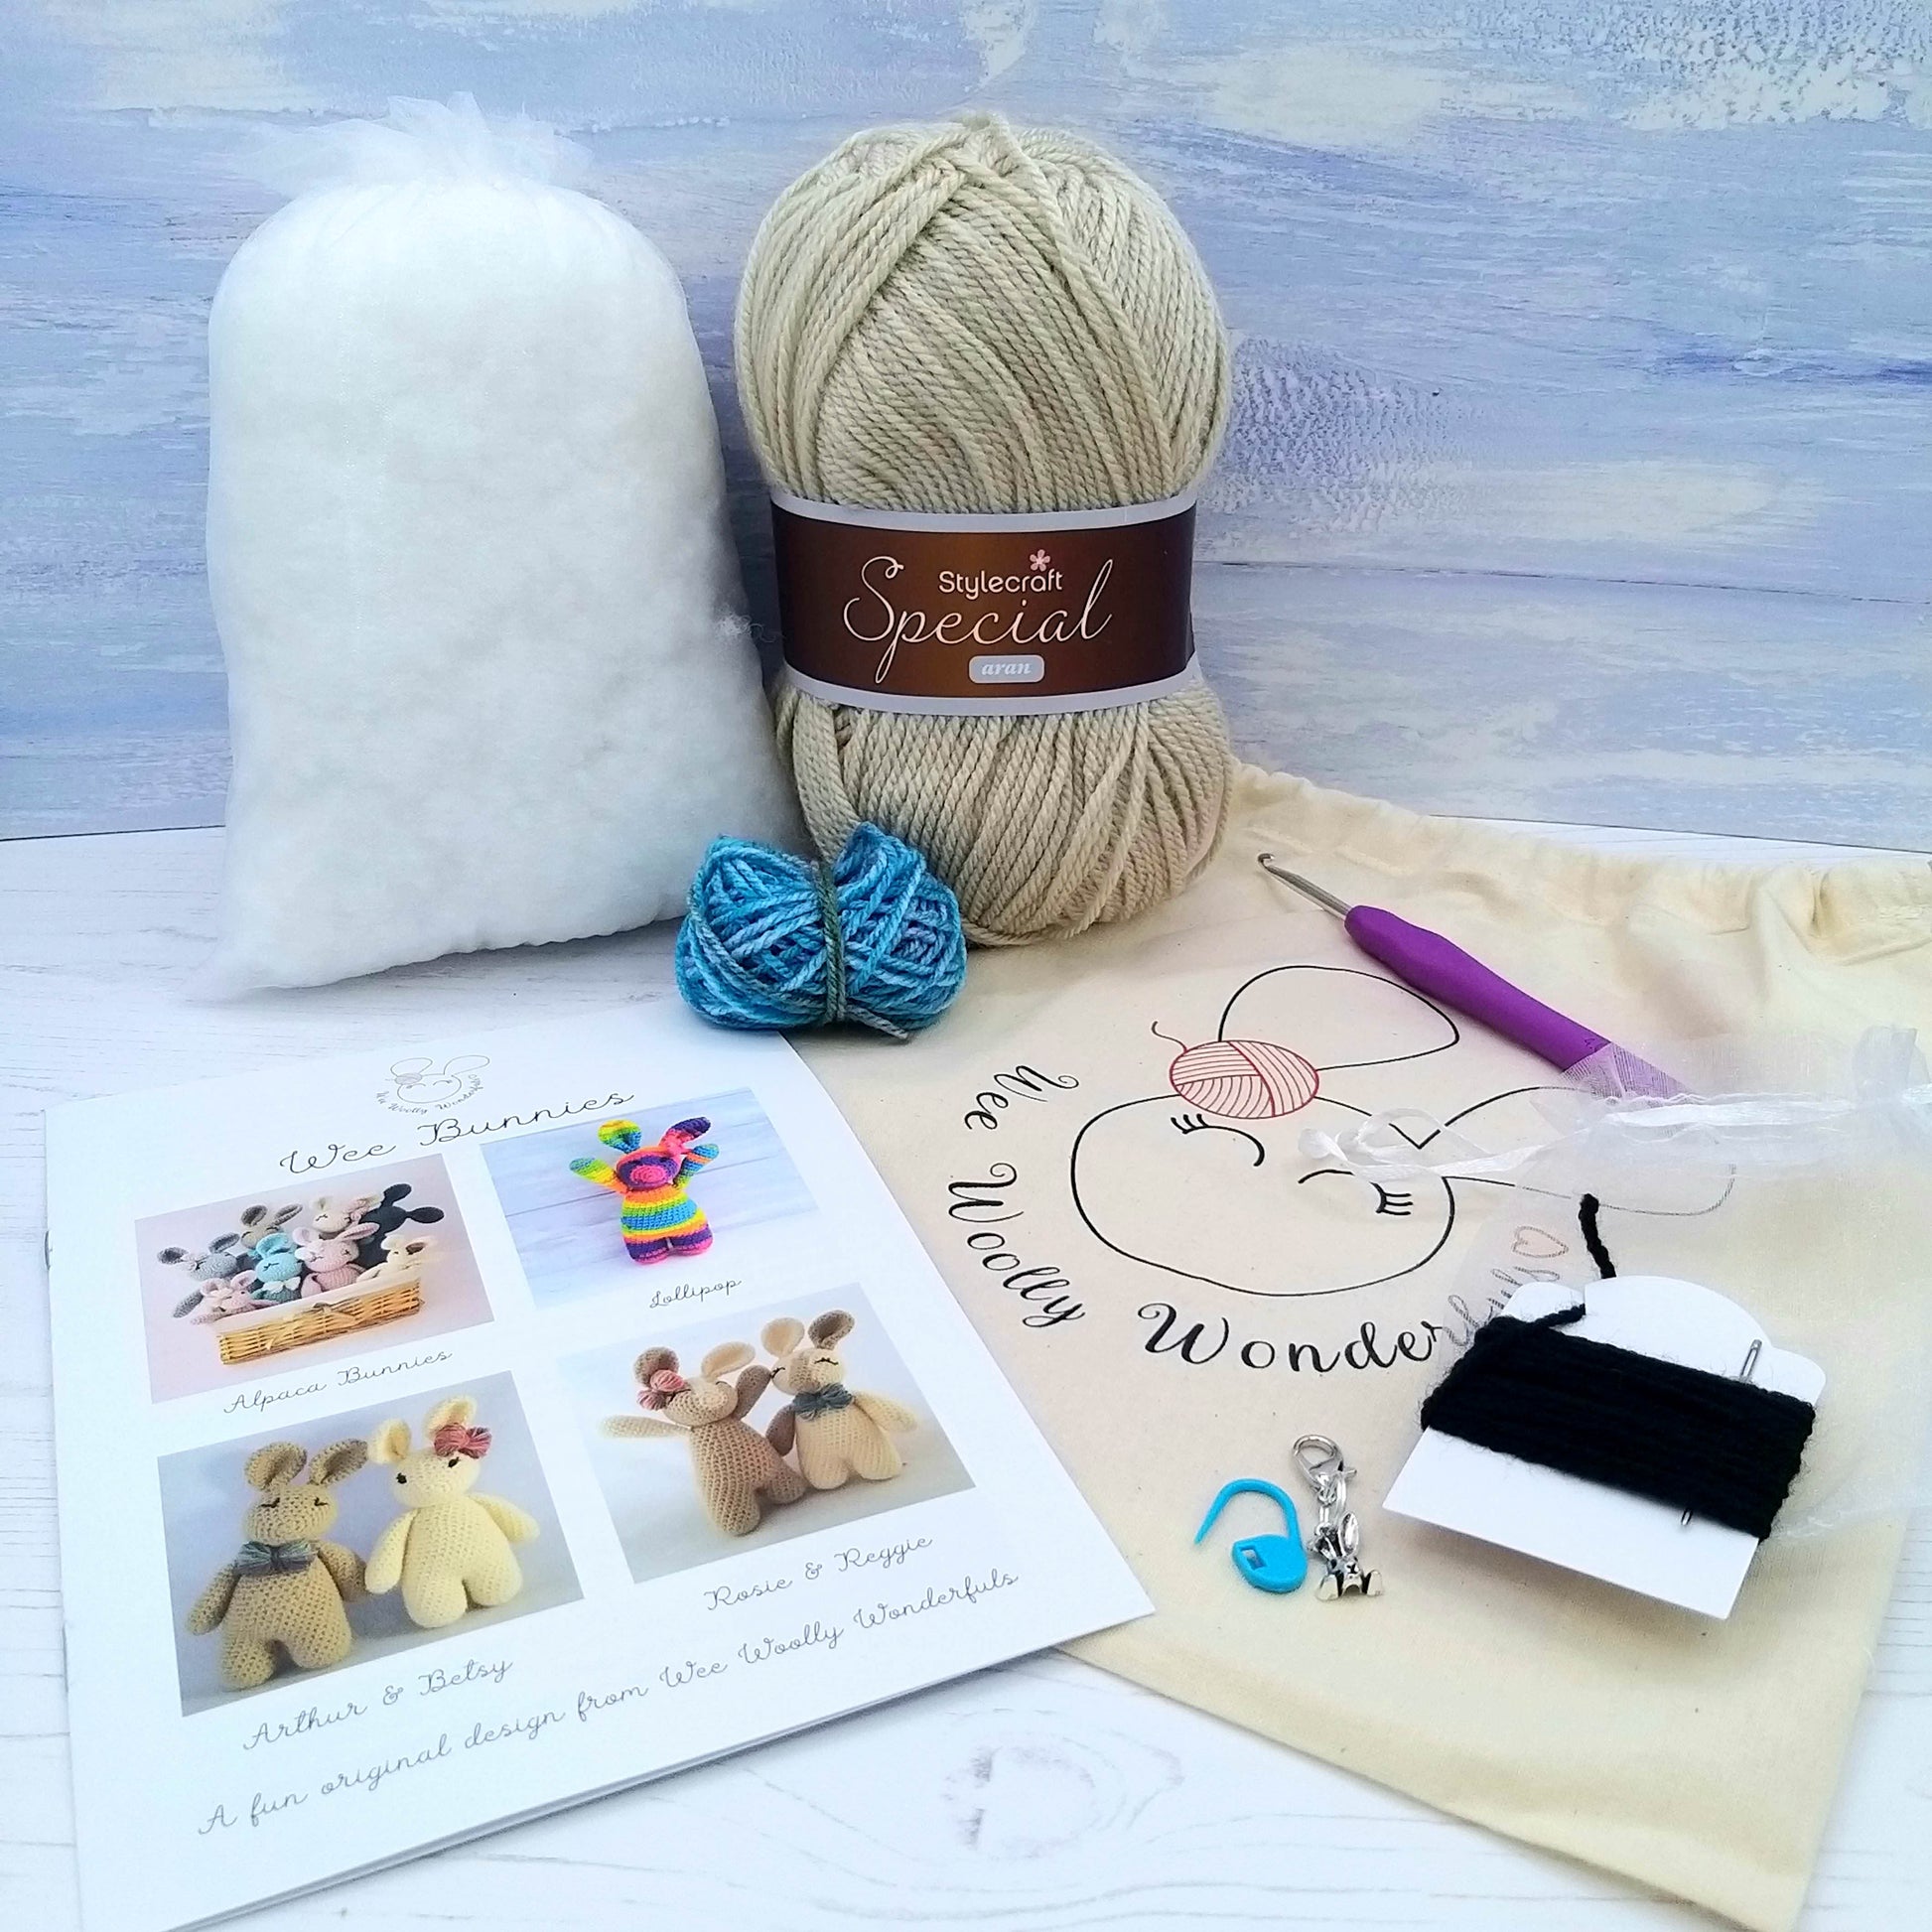 Crochet Kit Contents - Wool, pattern, stuffing, stitch marker and thread